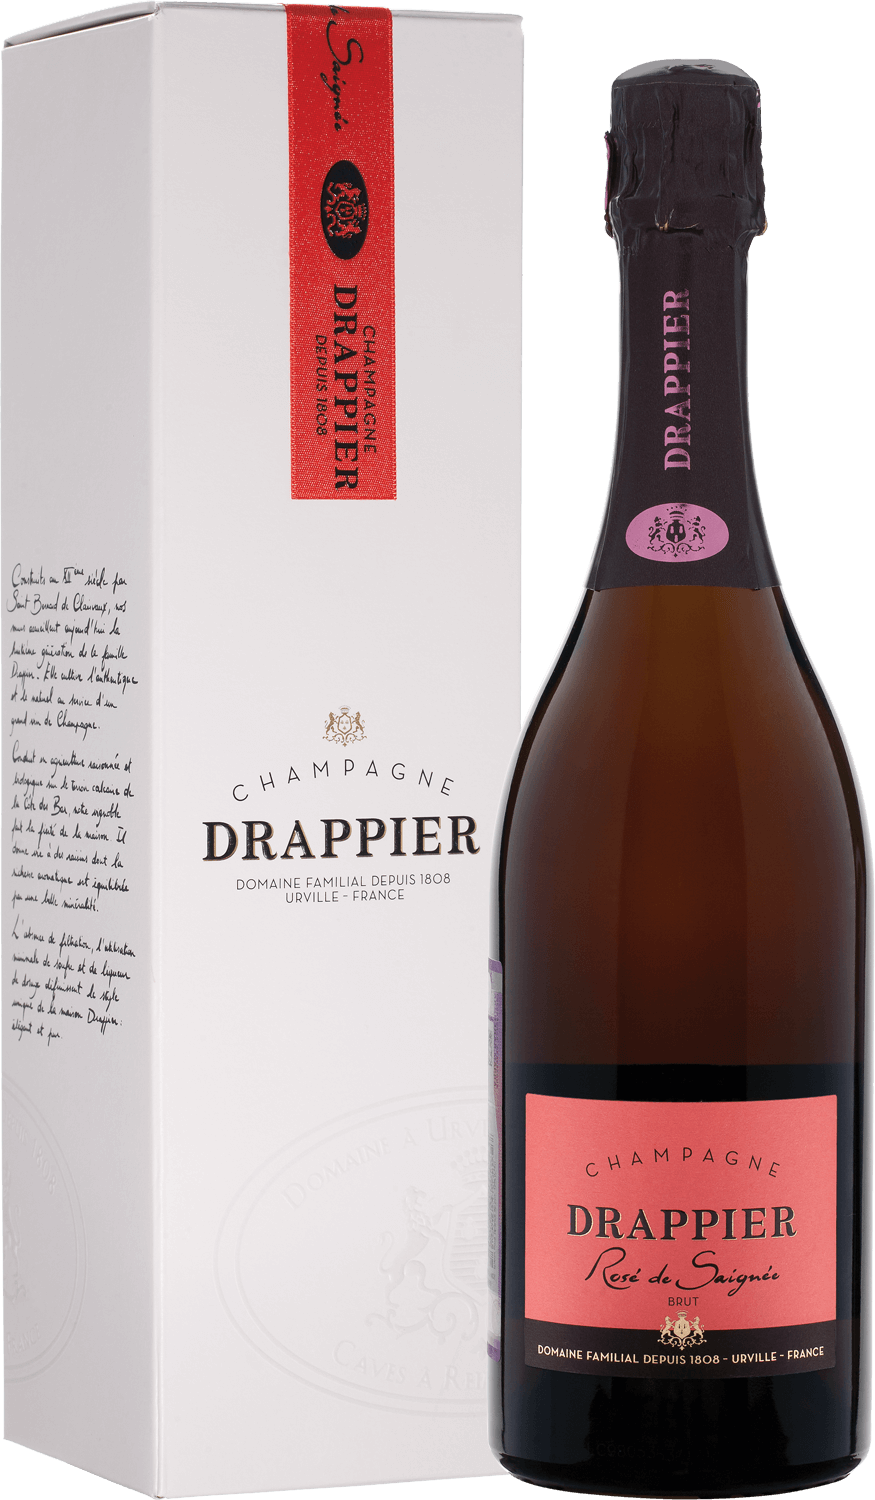 Drappier Brut Rose Champagne AOP in gift box drappier carte d or gift box